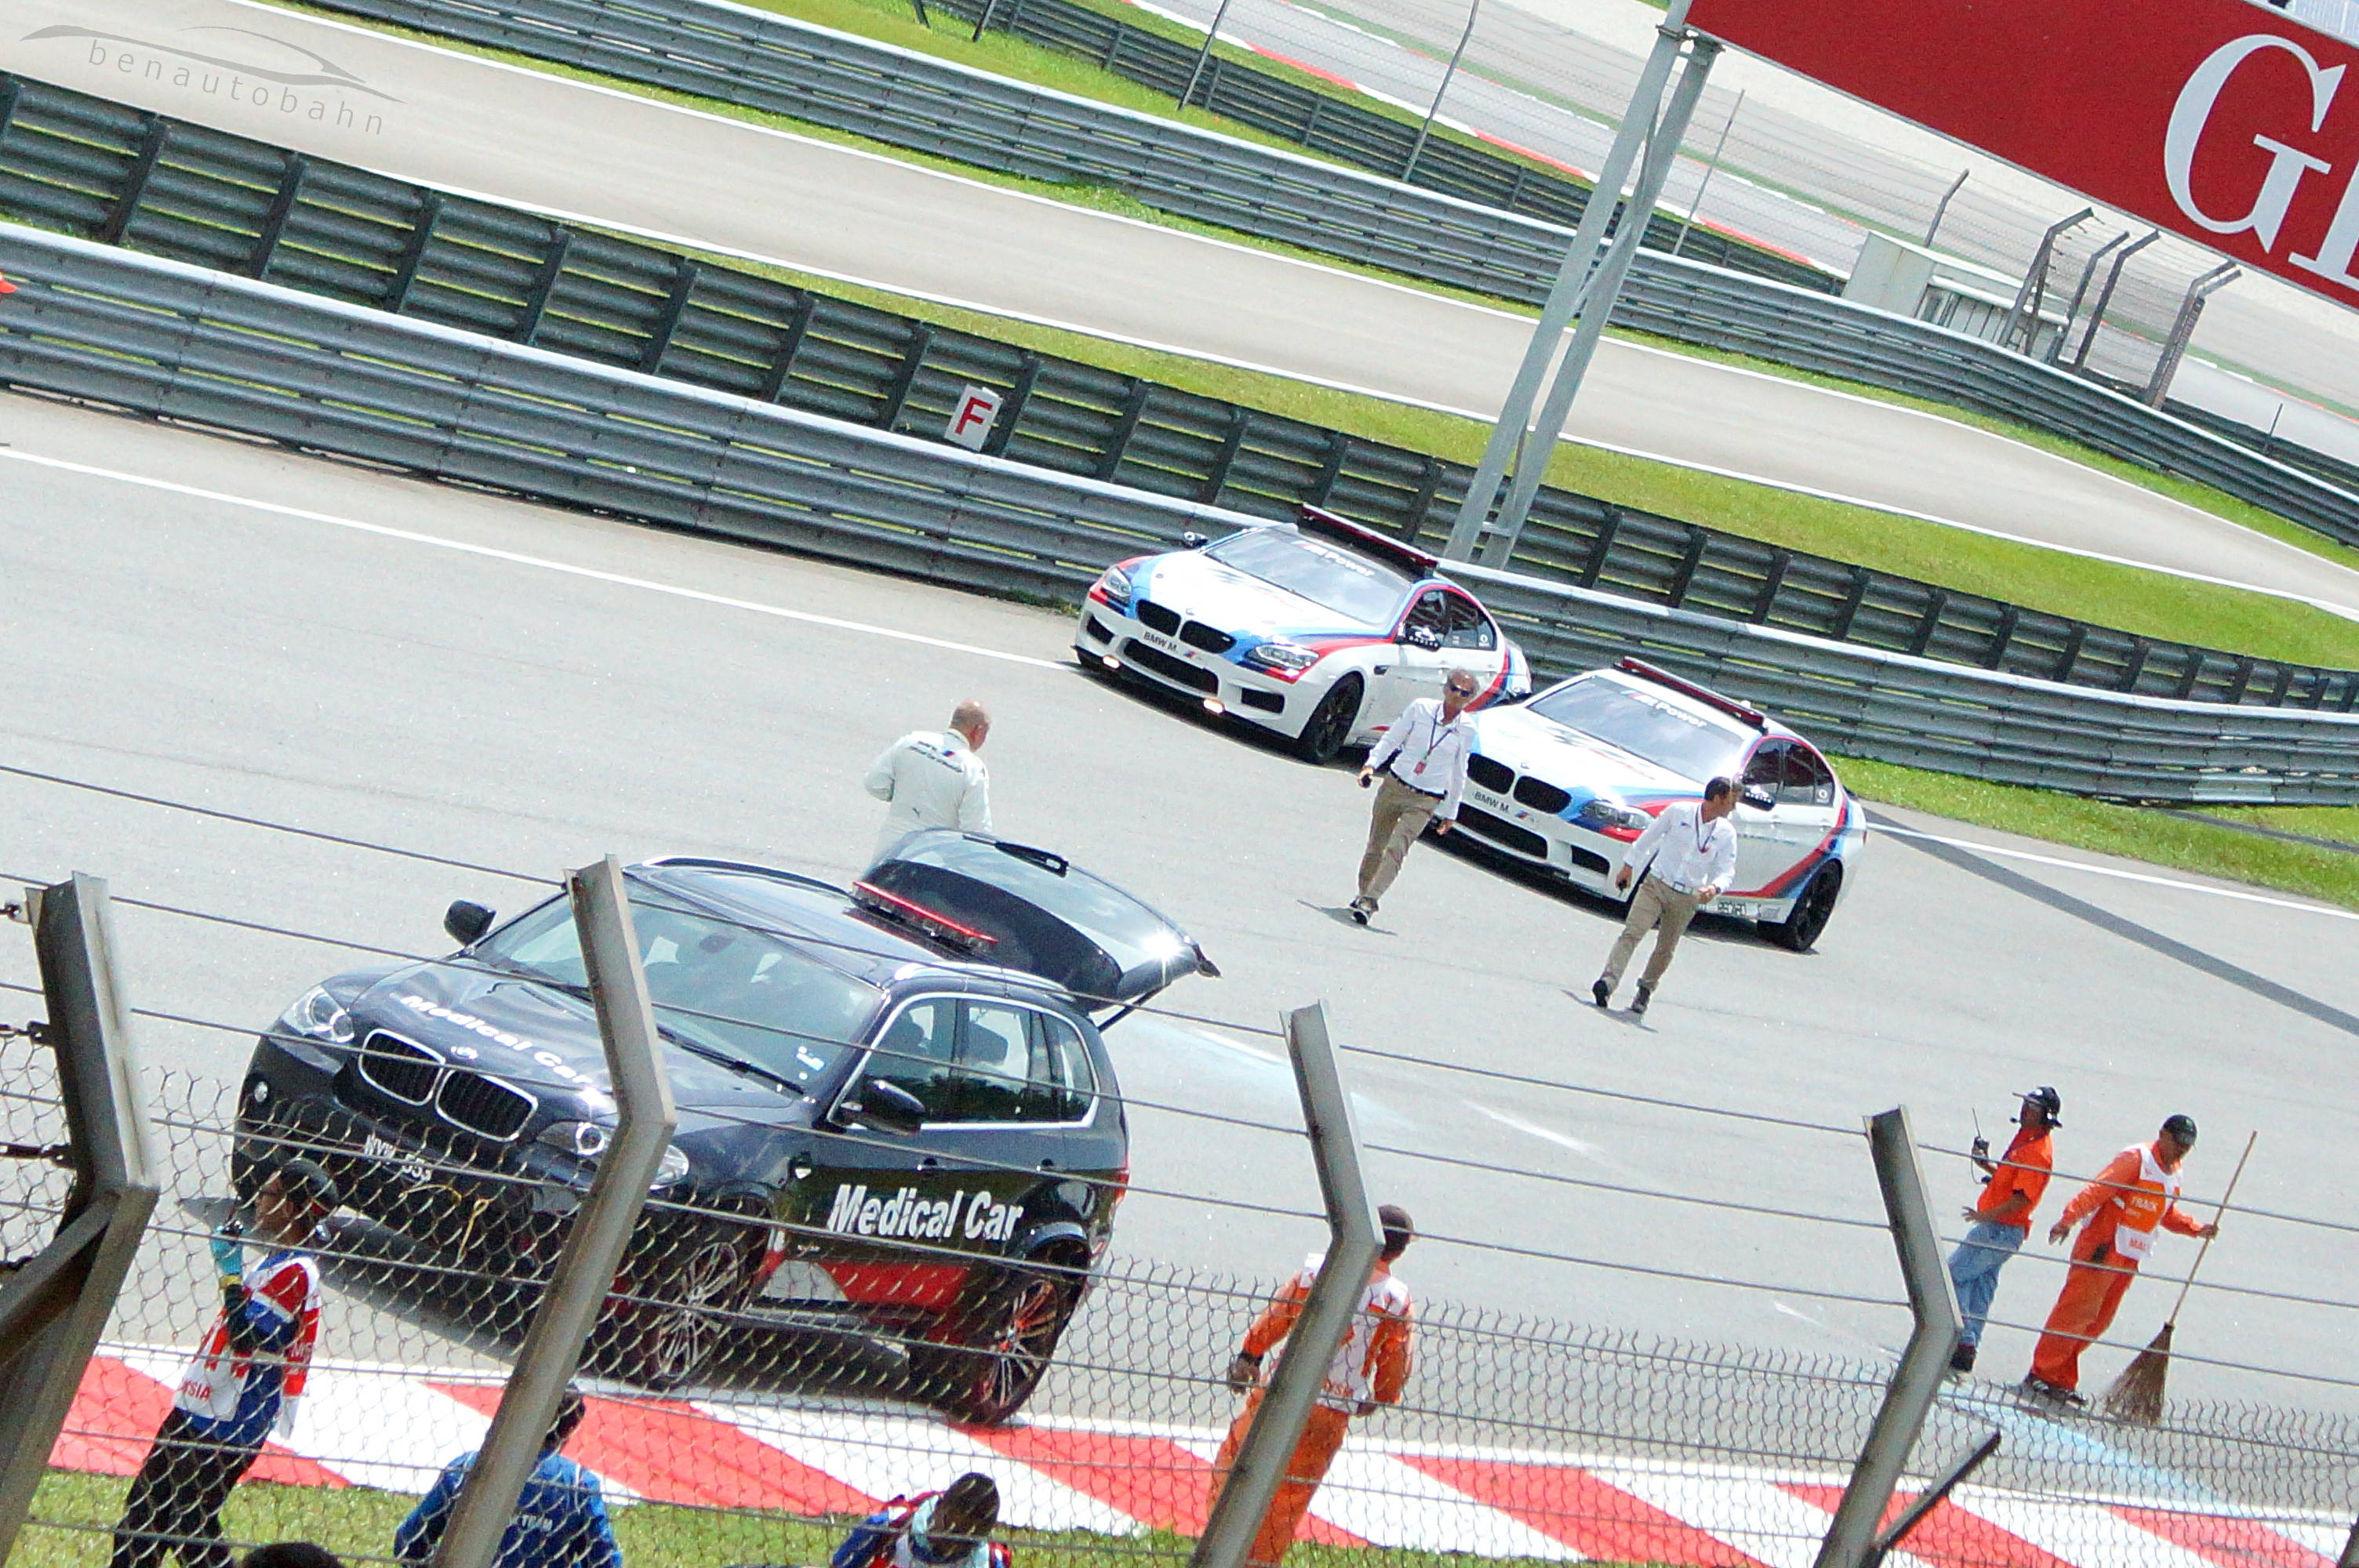 Loris Capirossi (right) and his partner (left) from the M5 Safety Car walking towards the crash site